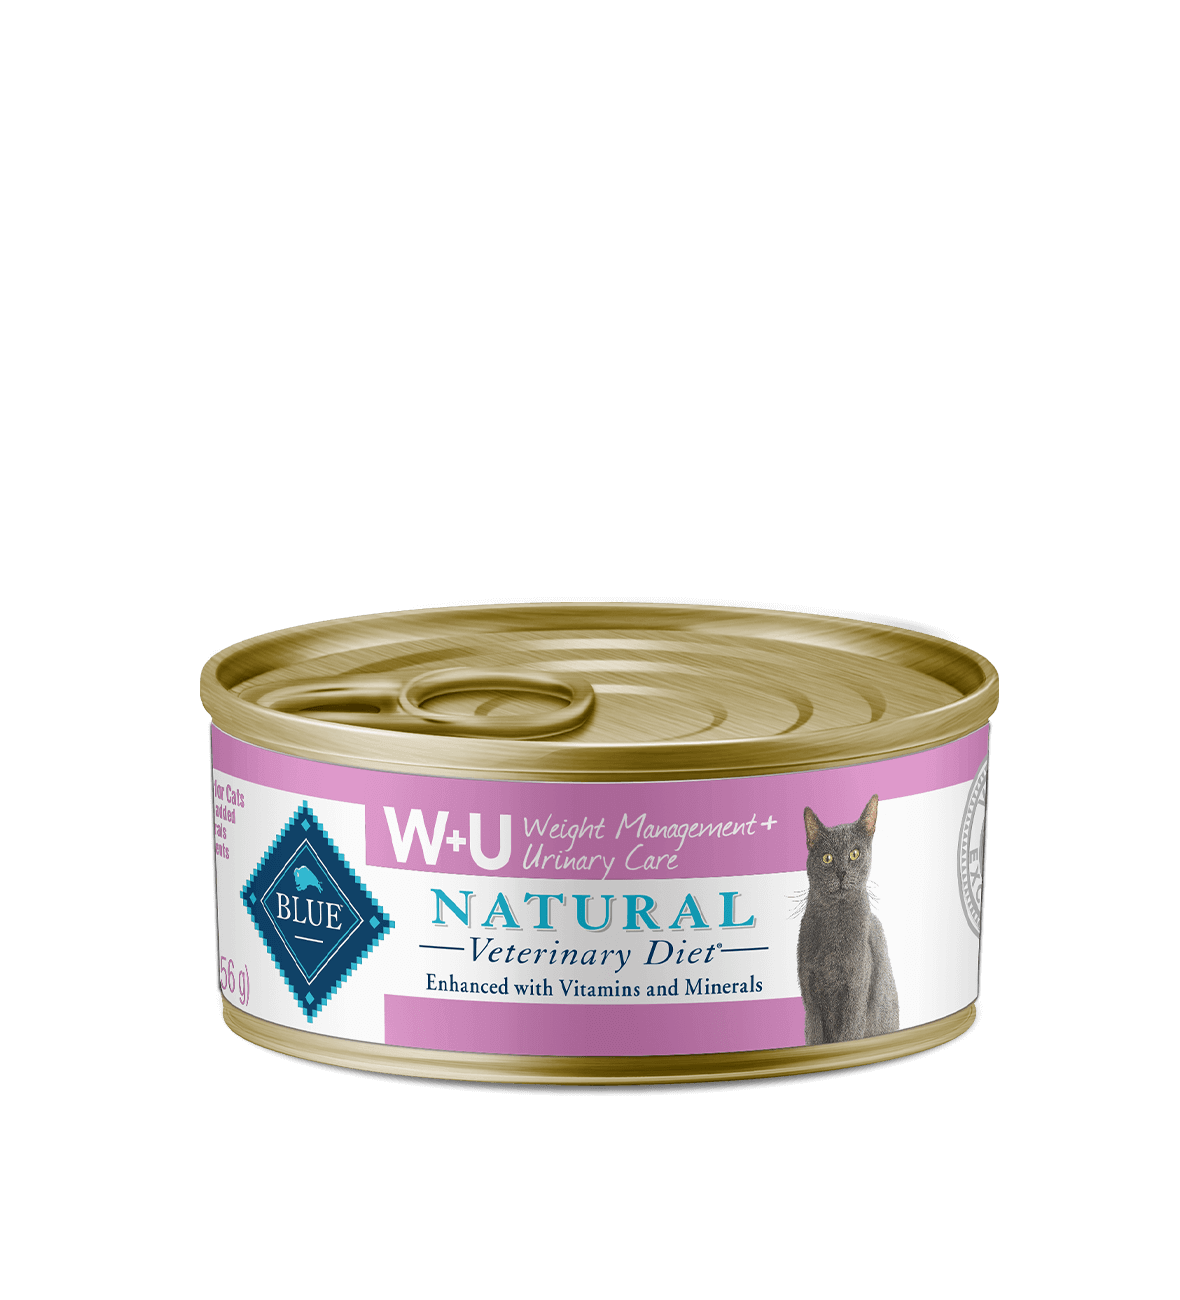 blue natural veterinary diet w+u weight management + urinary care cat wet food